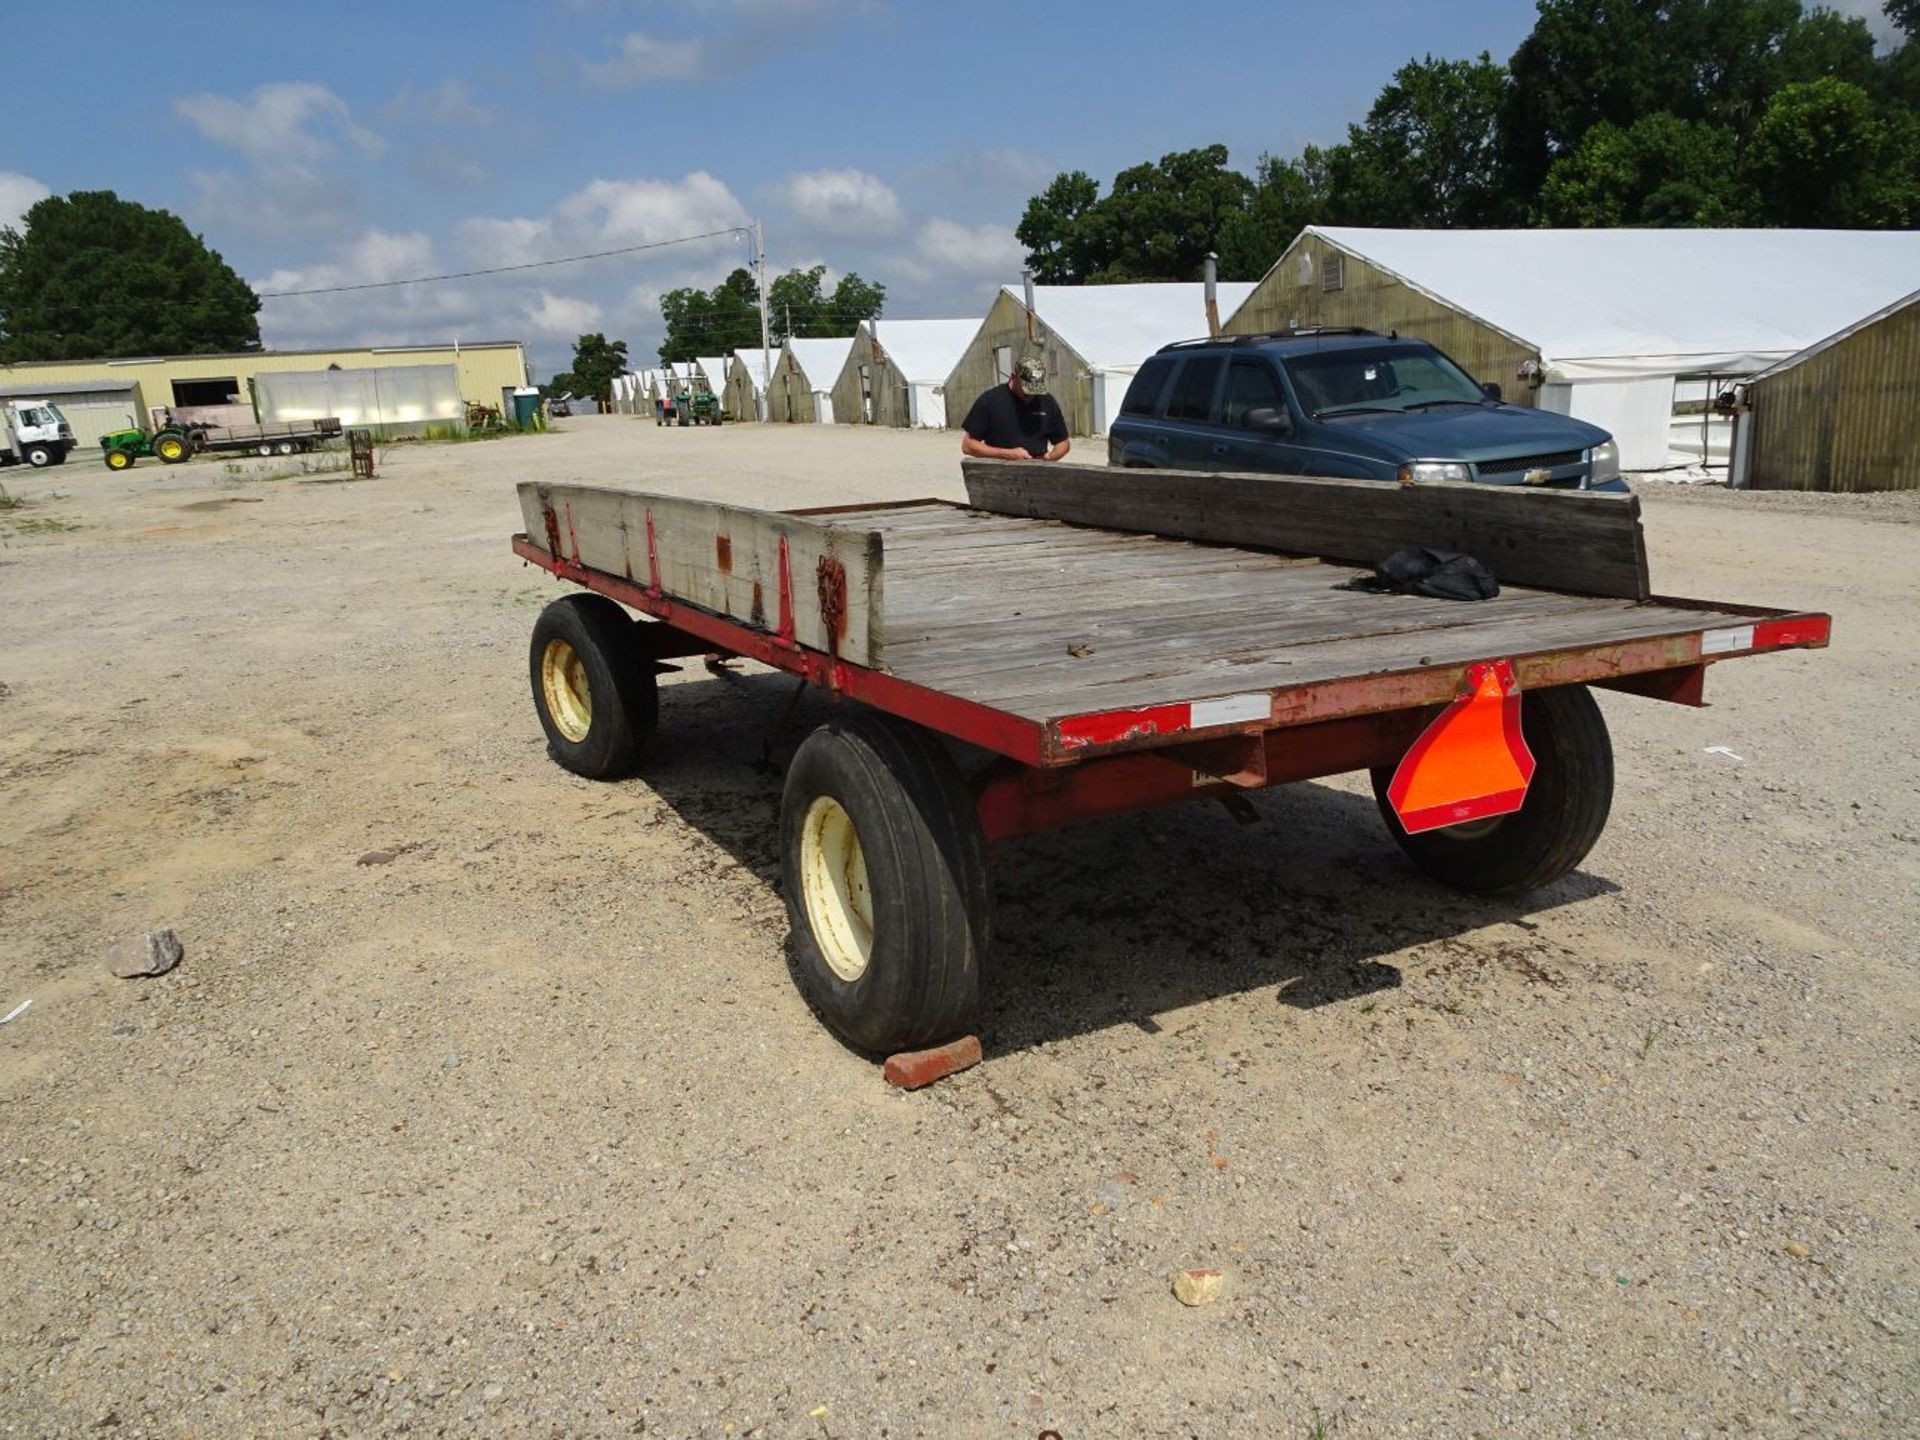 KORY 6872 STEERABLE WAGON, 15' BED, 11L-15 TIRES, WITH HINGED WOOD SIDES (LOCATION: FARM C) - Image 2 of 4